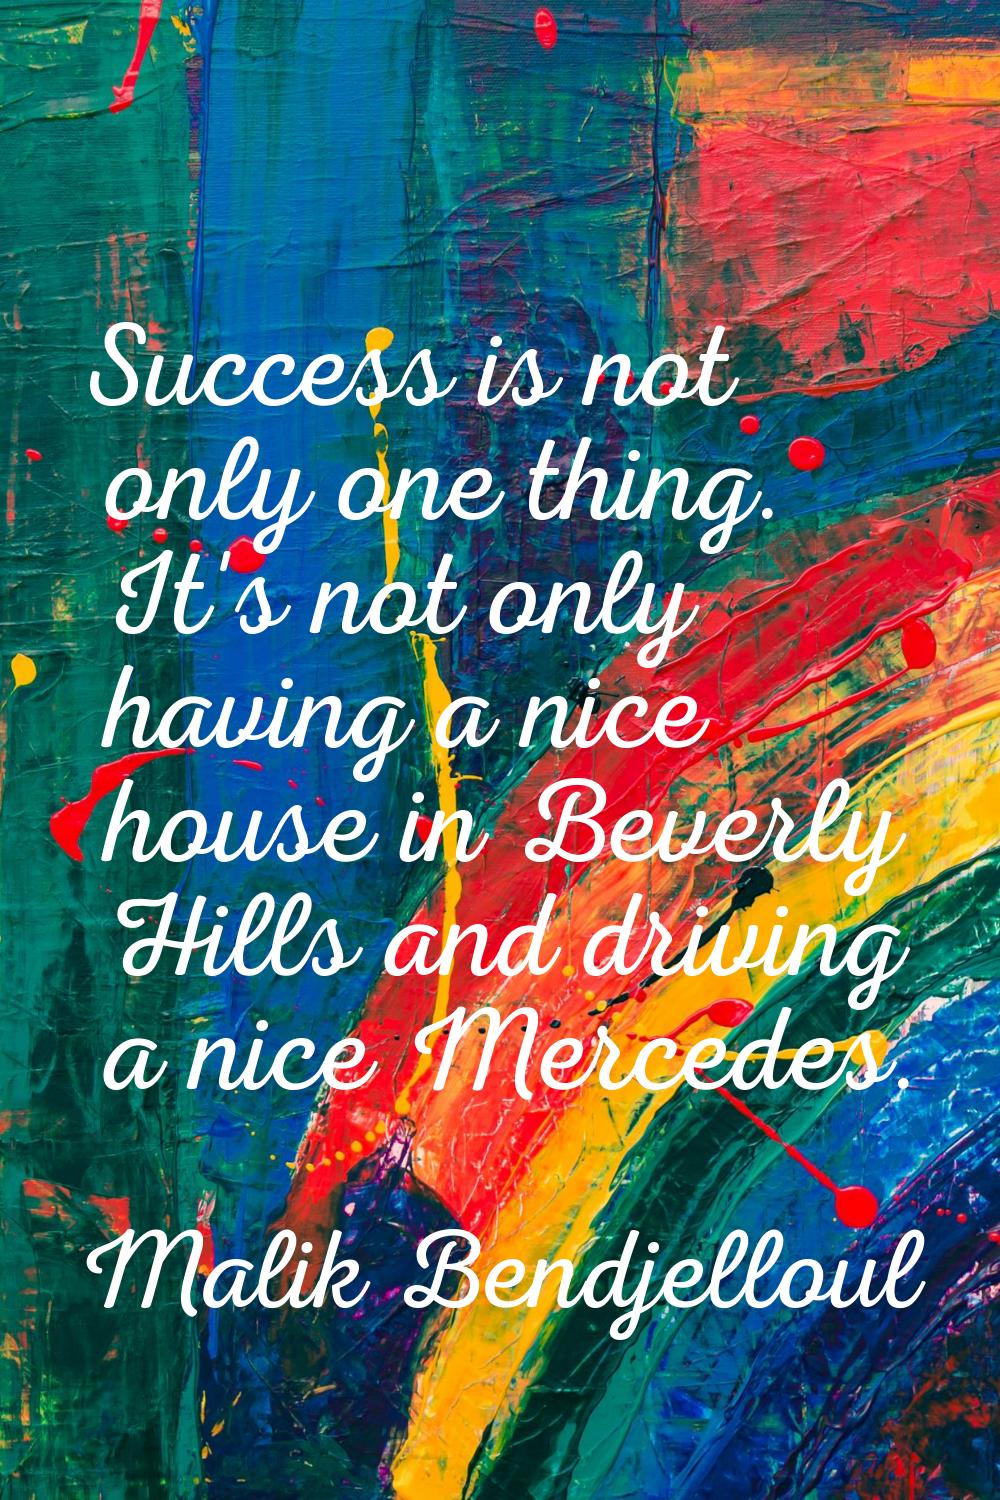 Success is not only one thing. It's not only having a nice house in Beverly Hills and driving a nic